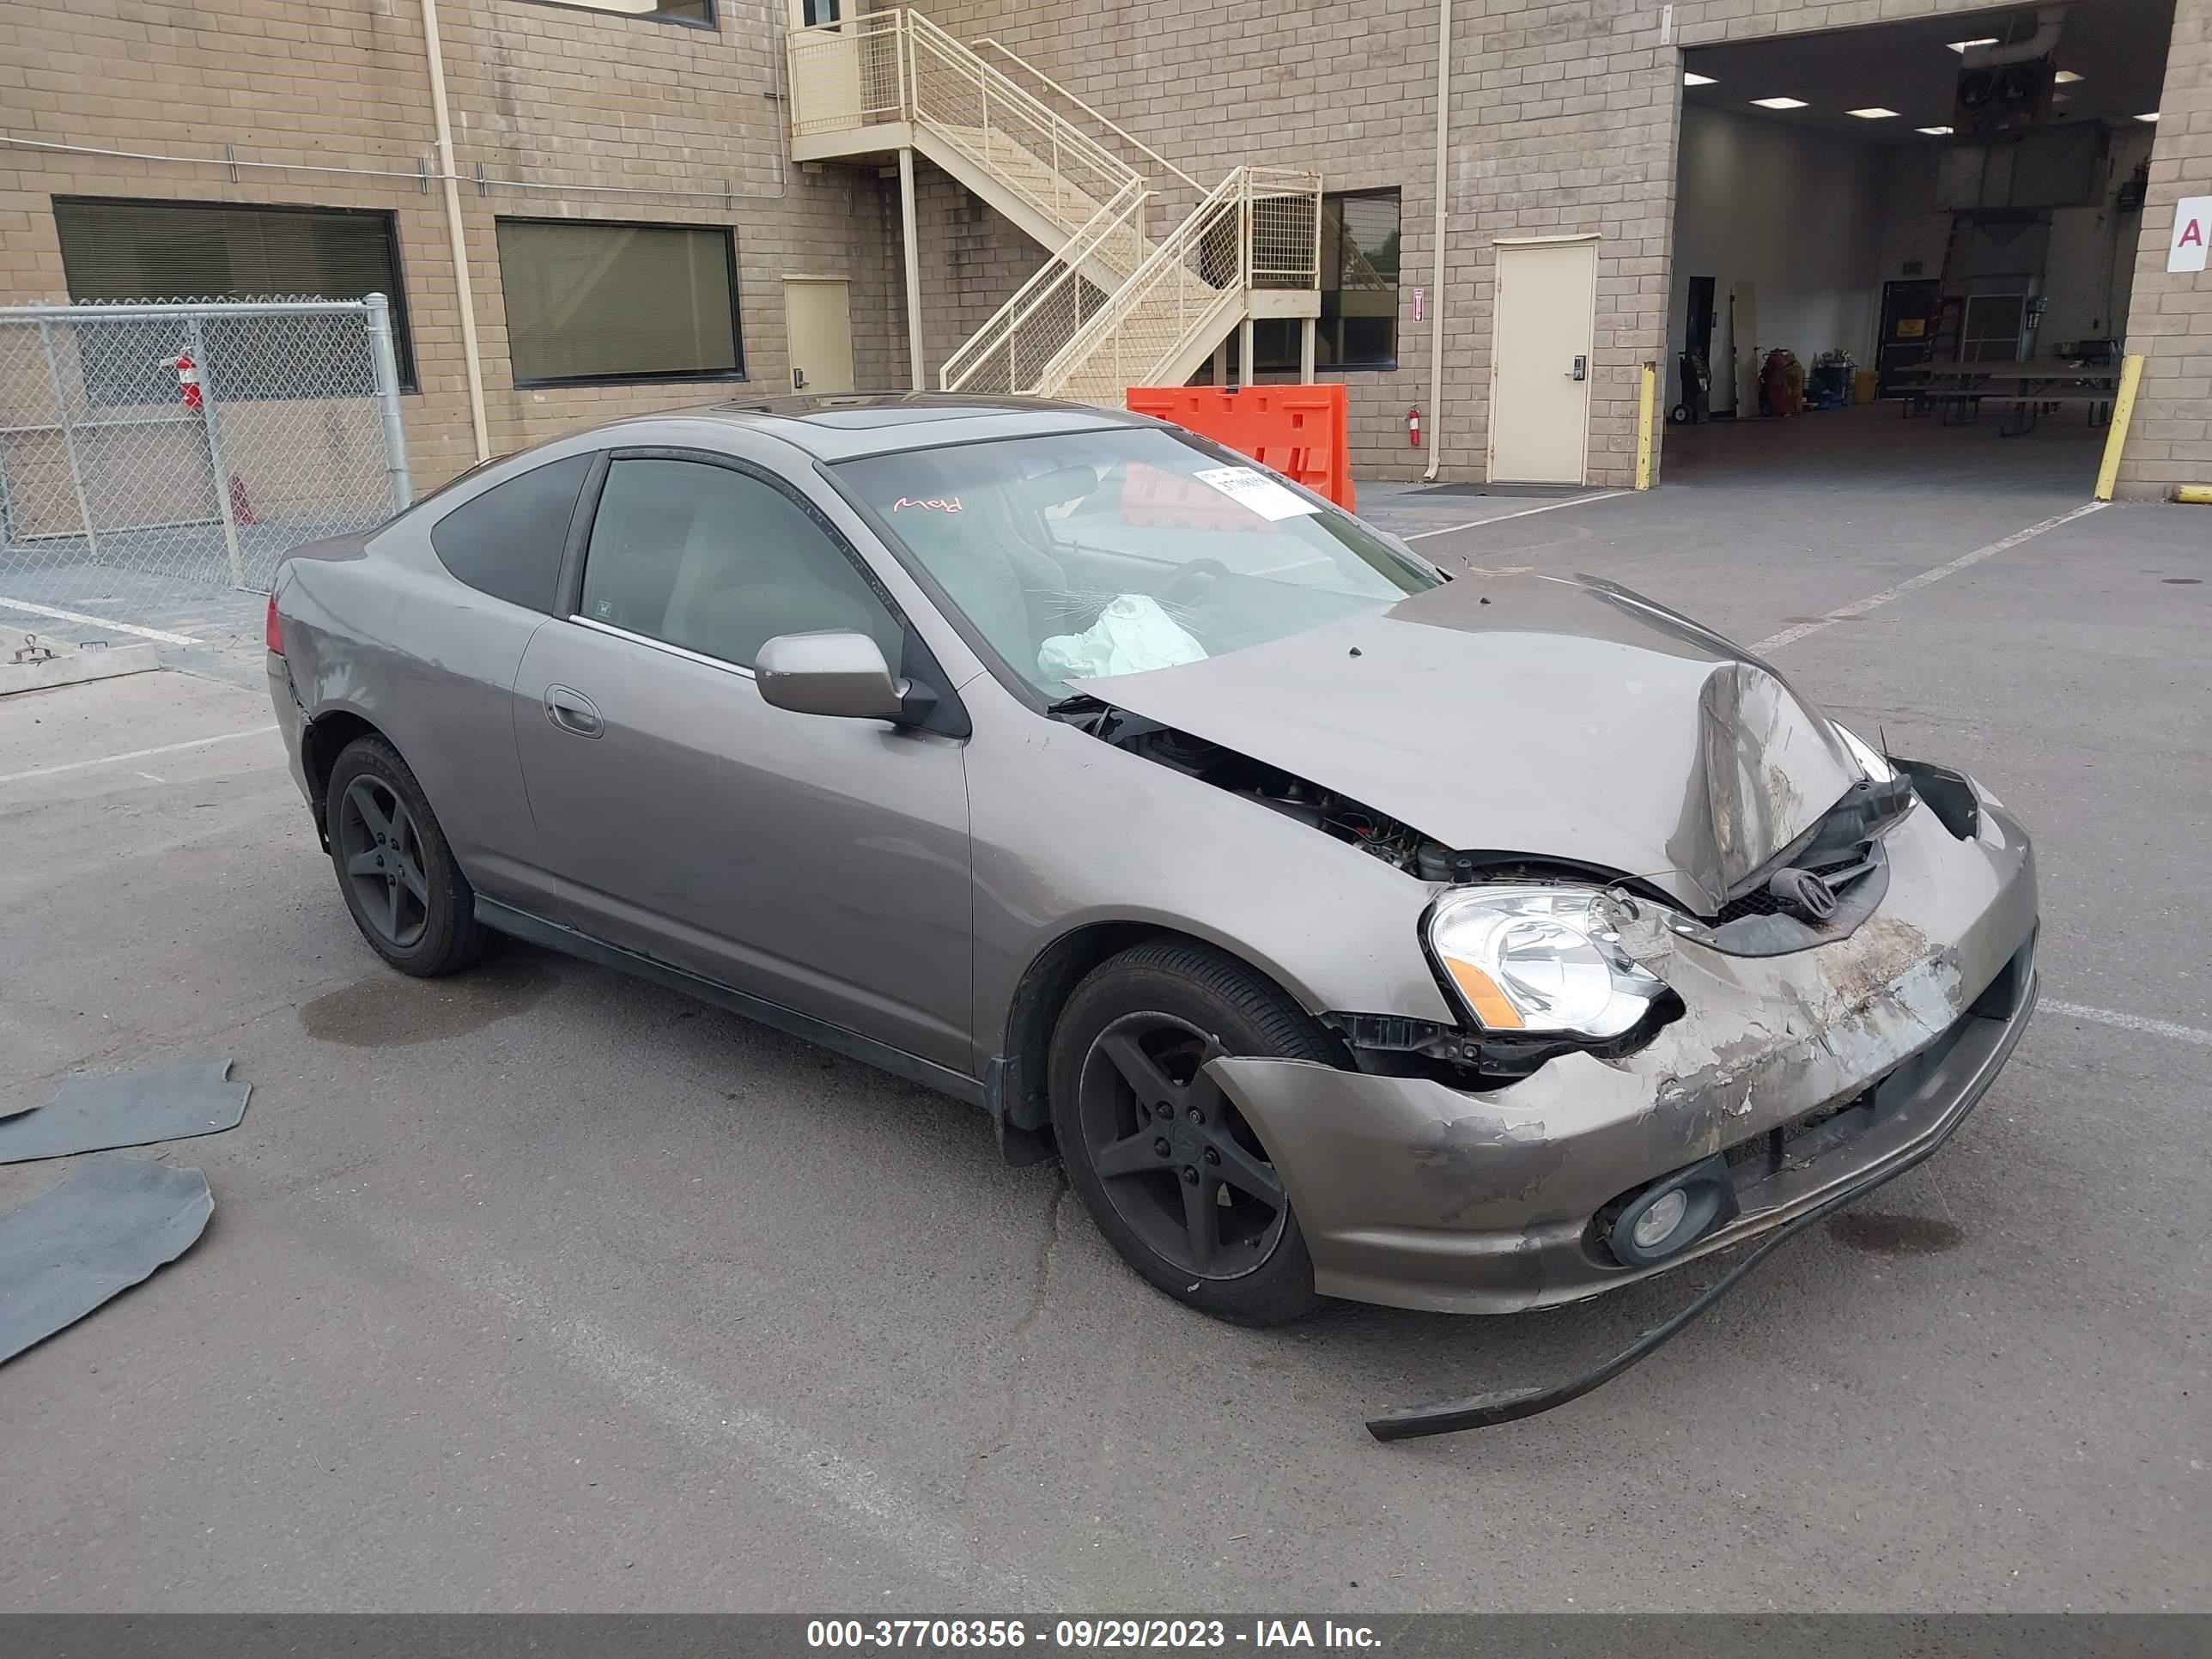 VIN: JH4DC54894S008032 - acura rsx